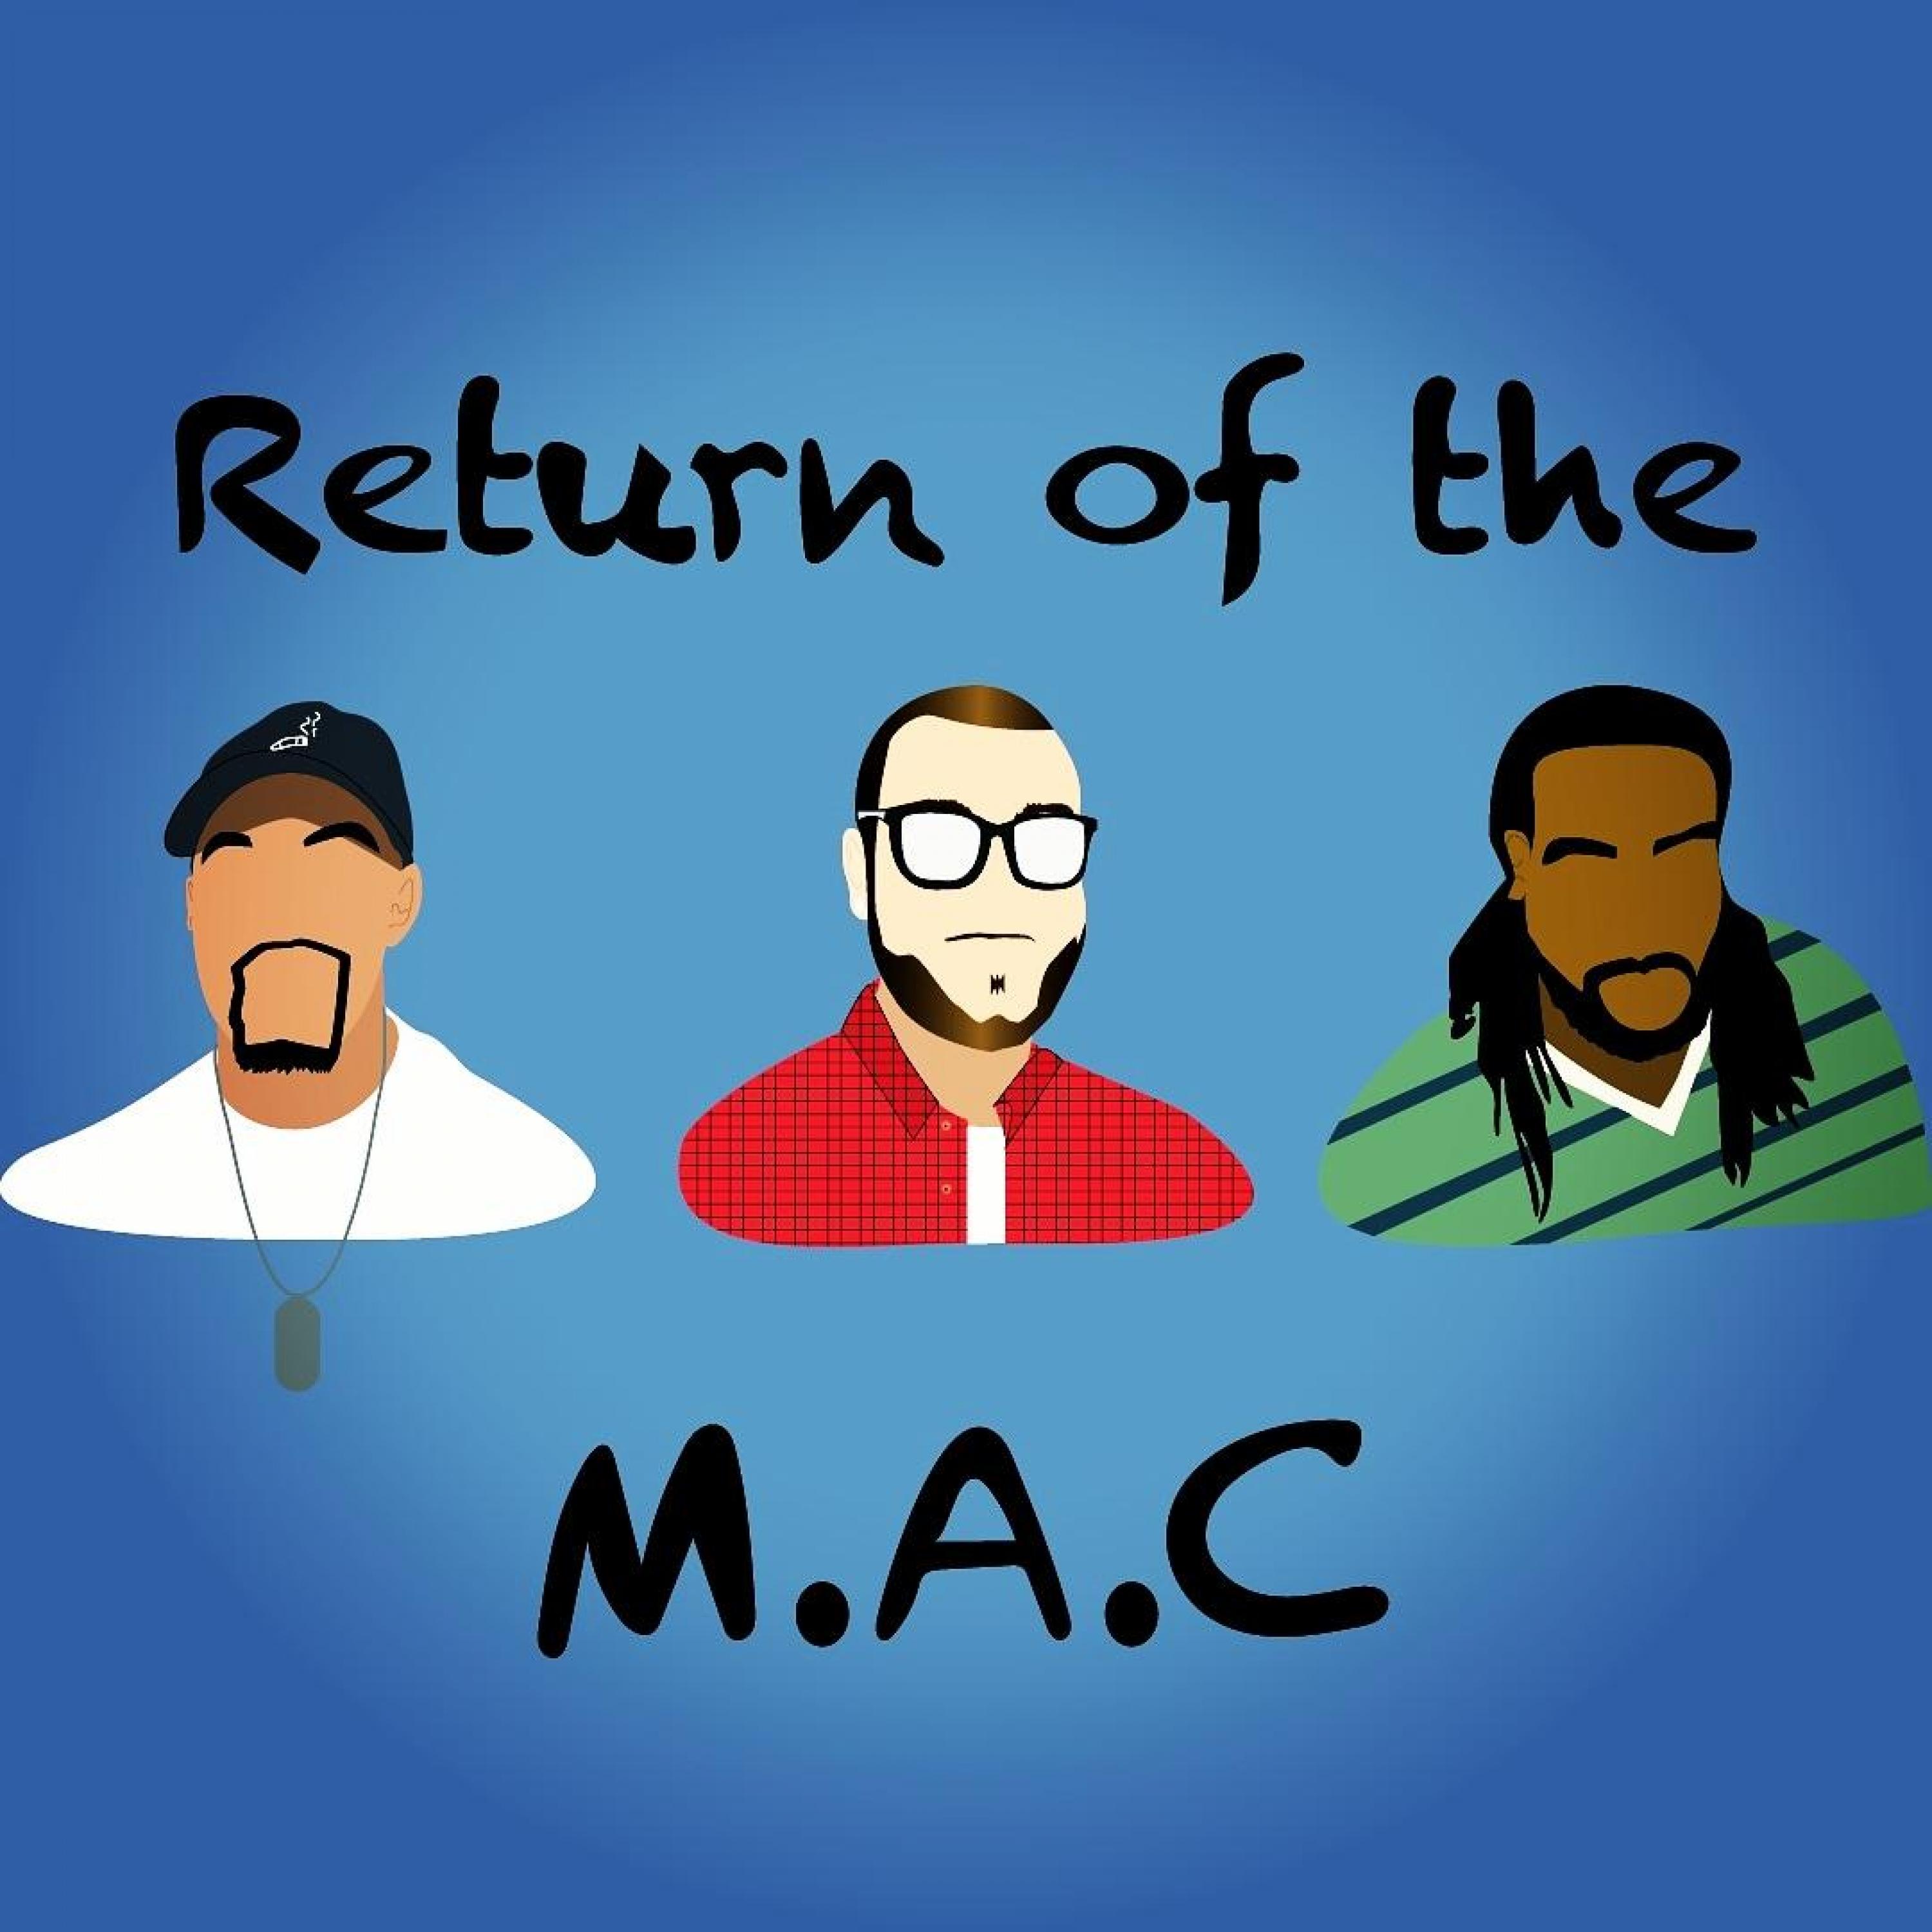 Return of the M.A.C